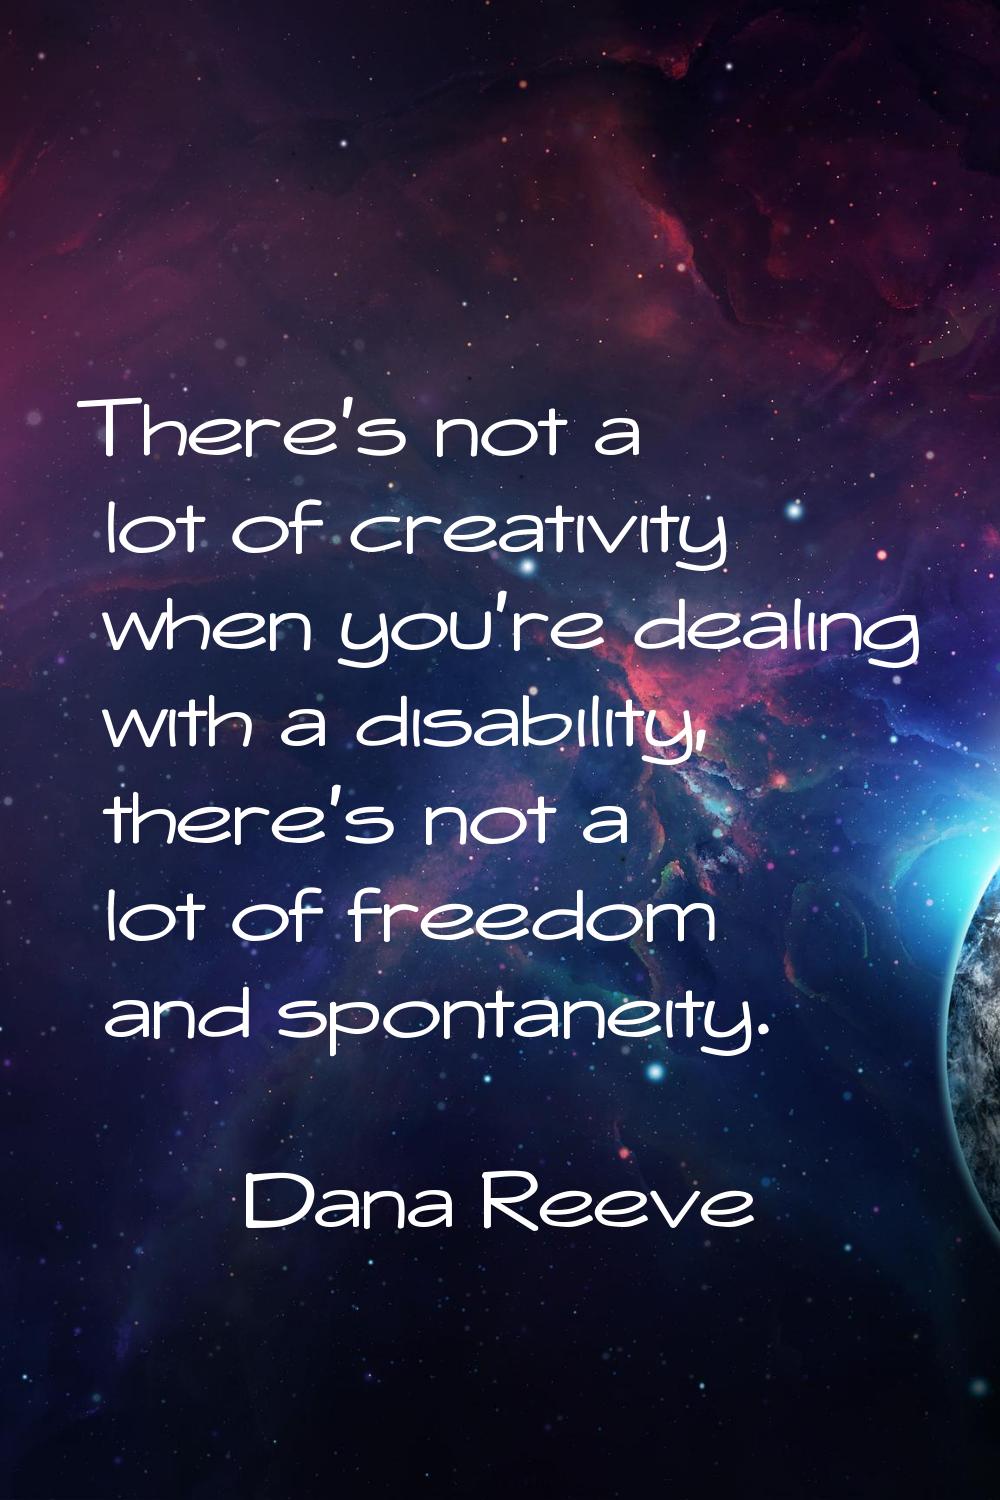 There's not a lot of creativity when you're dealing with a disability, there's not a lot of freedom